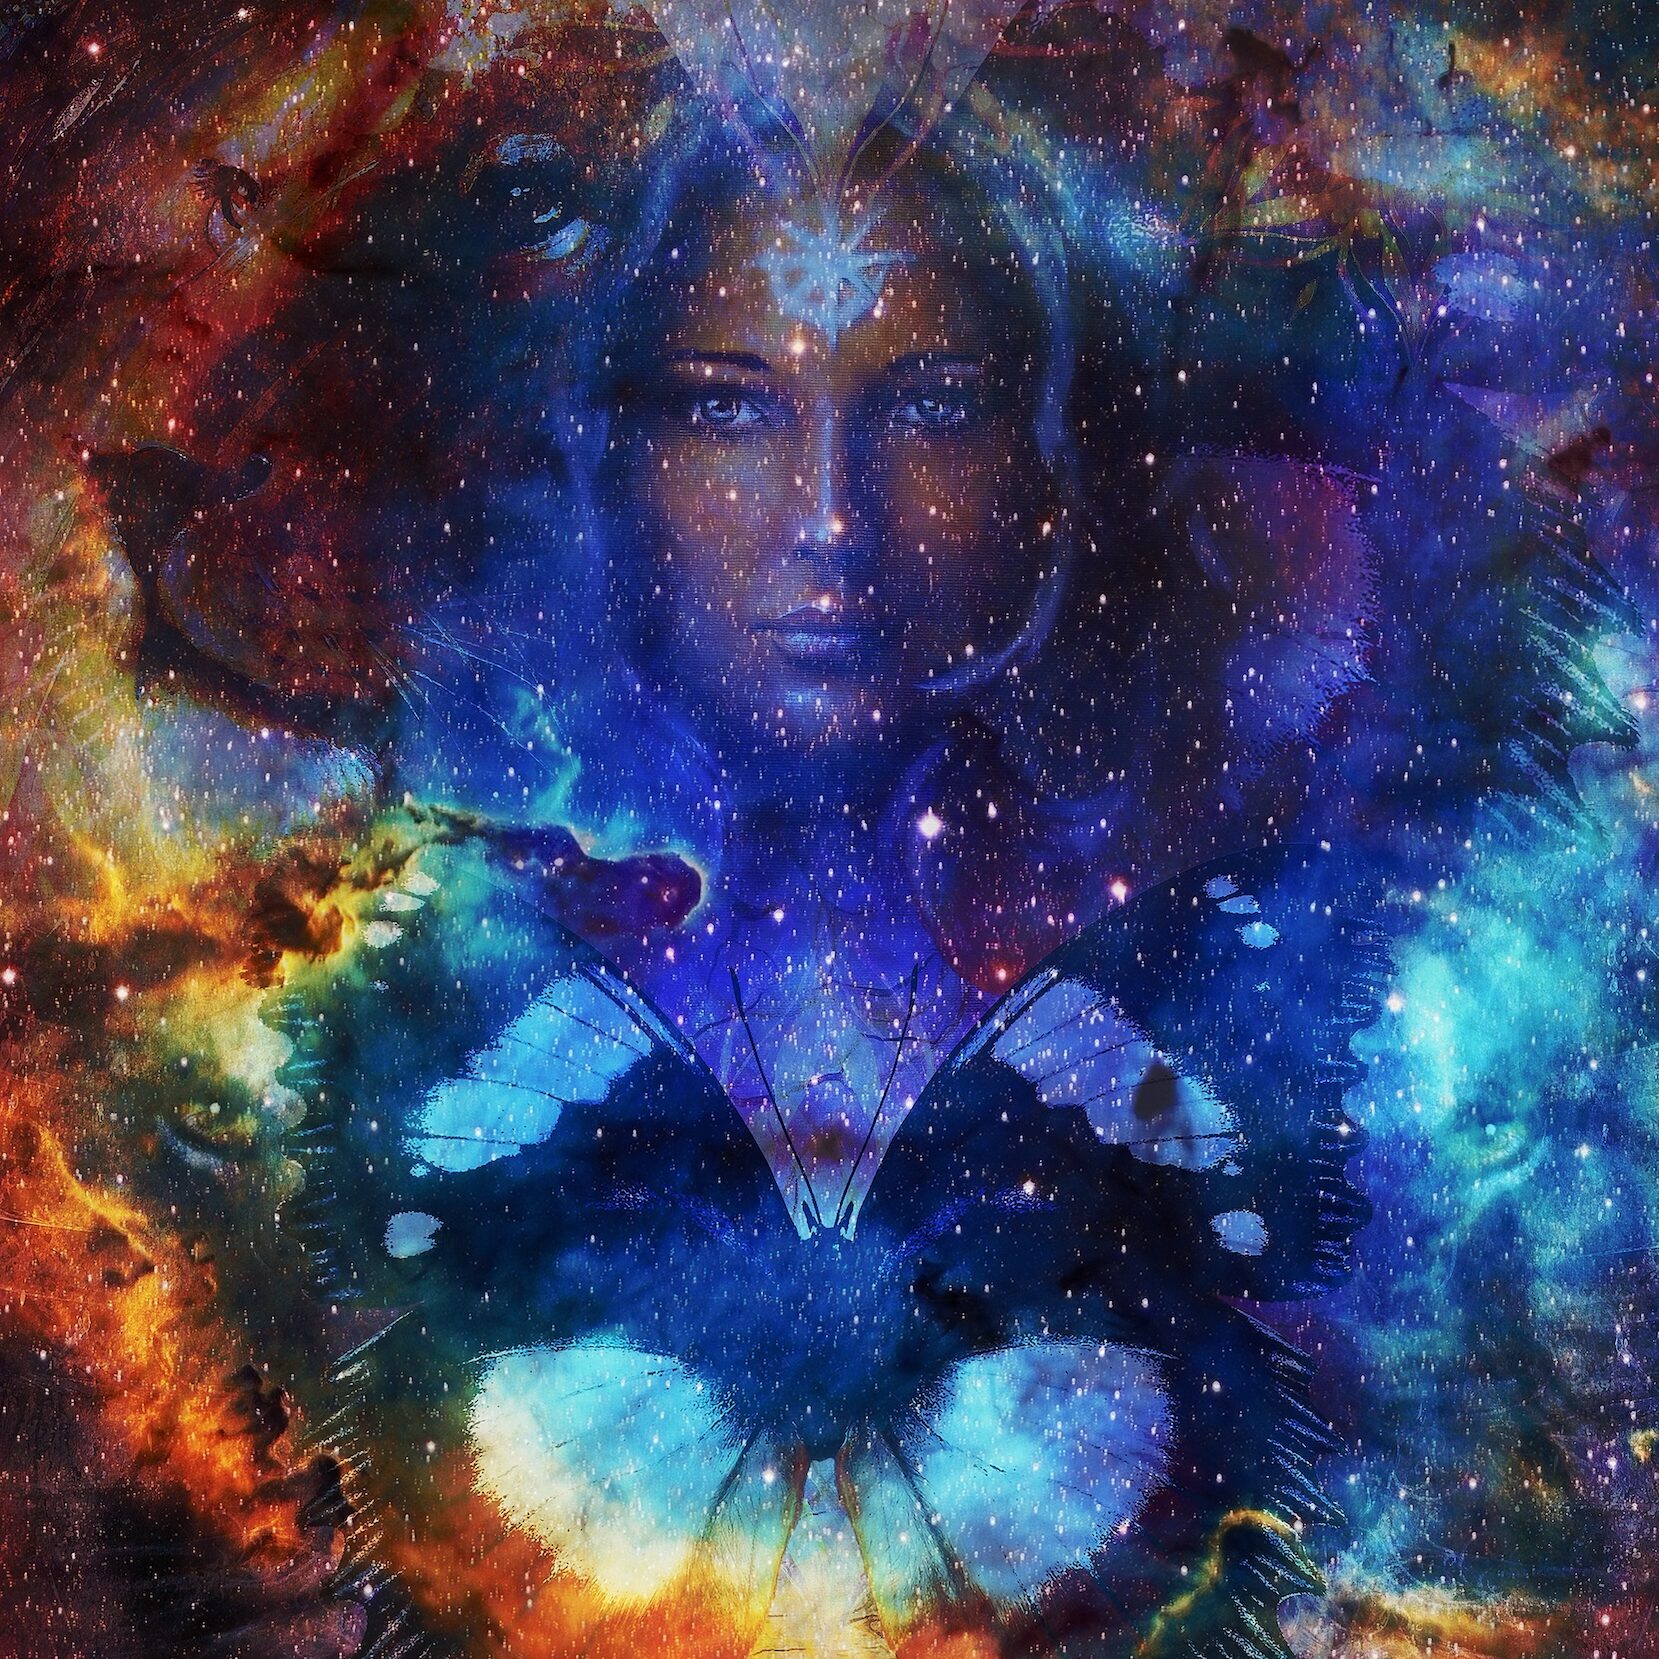 Goodnes woman and lion and butterfly in space with galaxi and stars. profile portrait, eye contact.